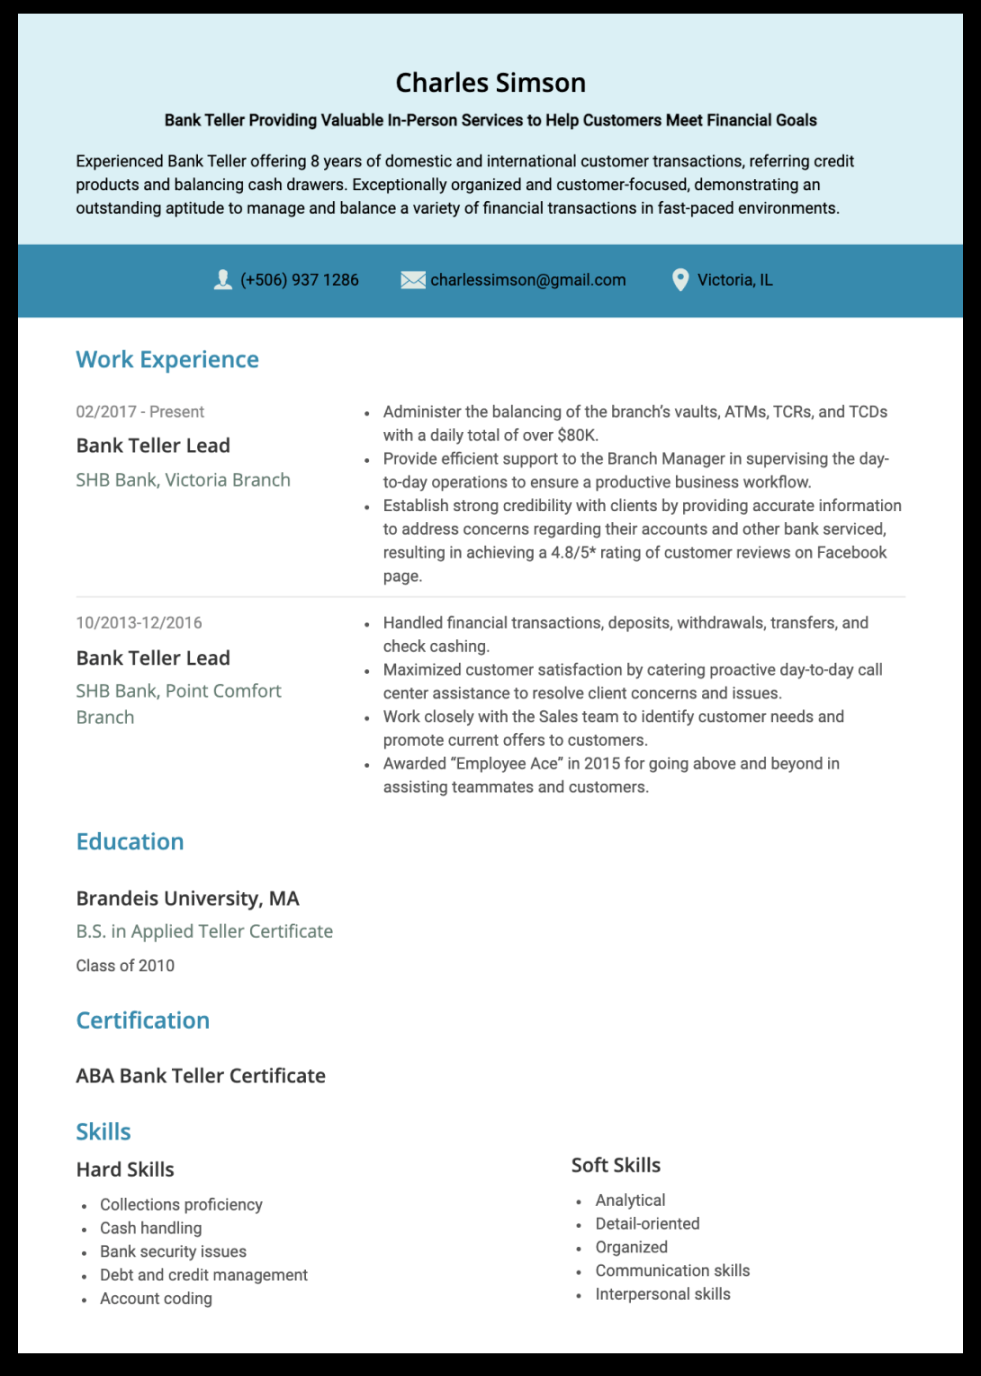 Banking Resume : Step-by-Step Writing Guide (with Examples